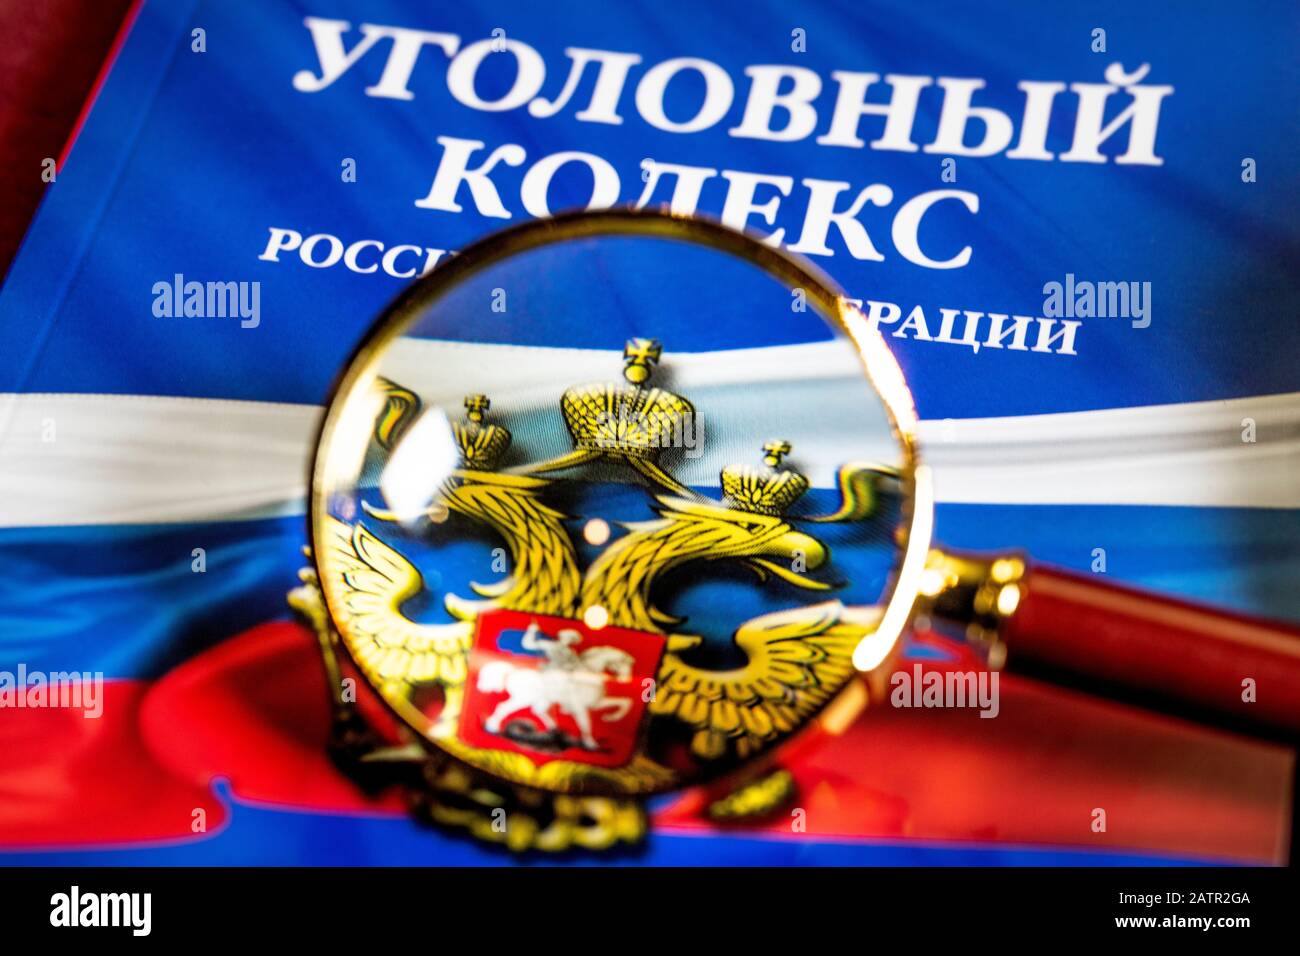 The Criminal code of the Russian Federation is under under a magnifying glass. The book's cover reads in Russian 'Criminal Code of the Russian Federat Stock Photo